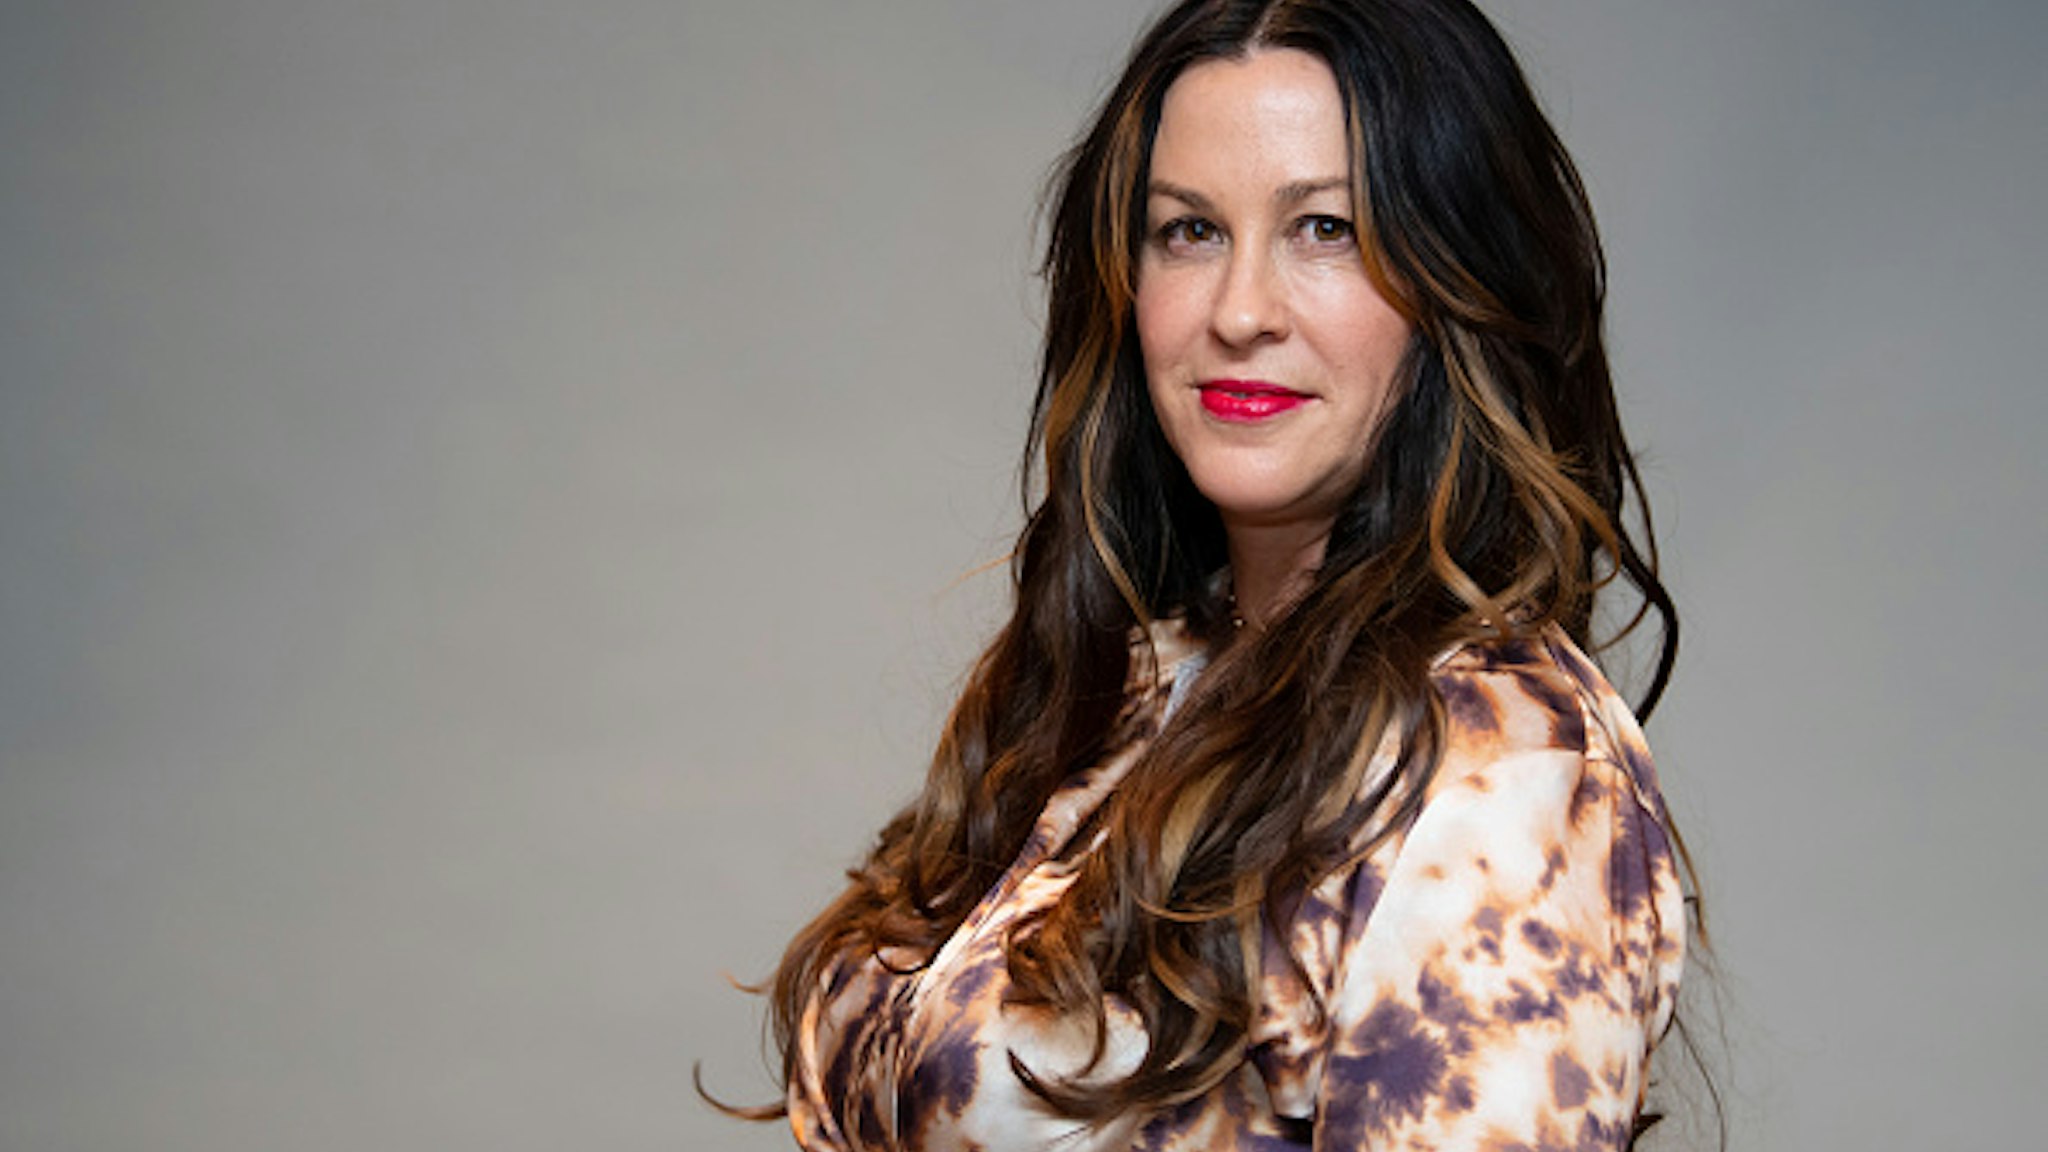 27 February 2020, Bavaria, Munich: Alanis Morissette, Canadian singer, recorded at a press event.